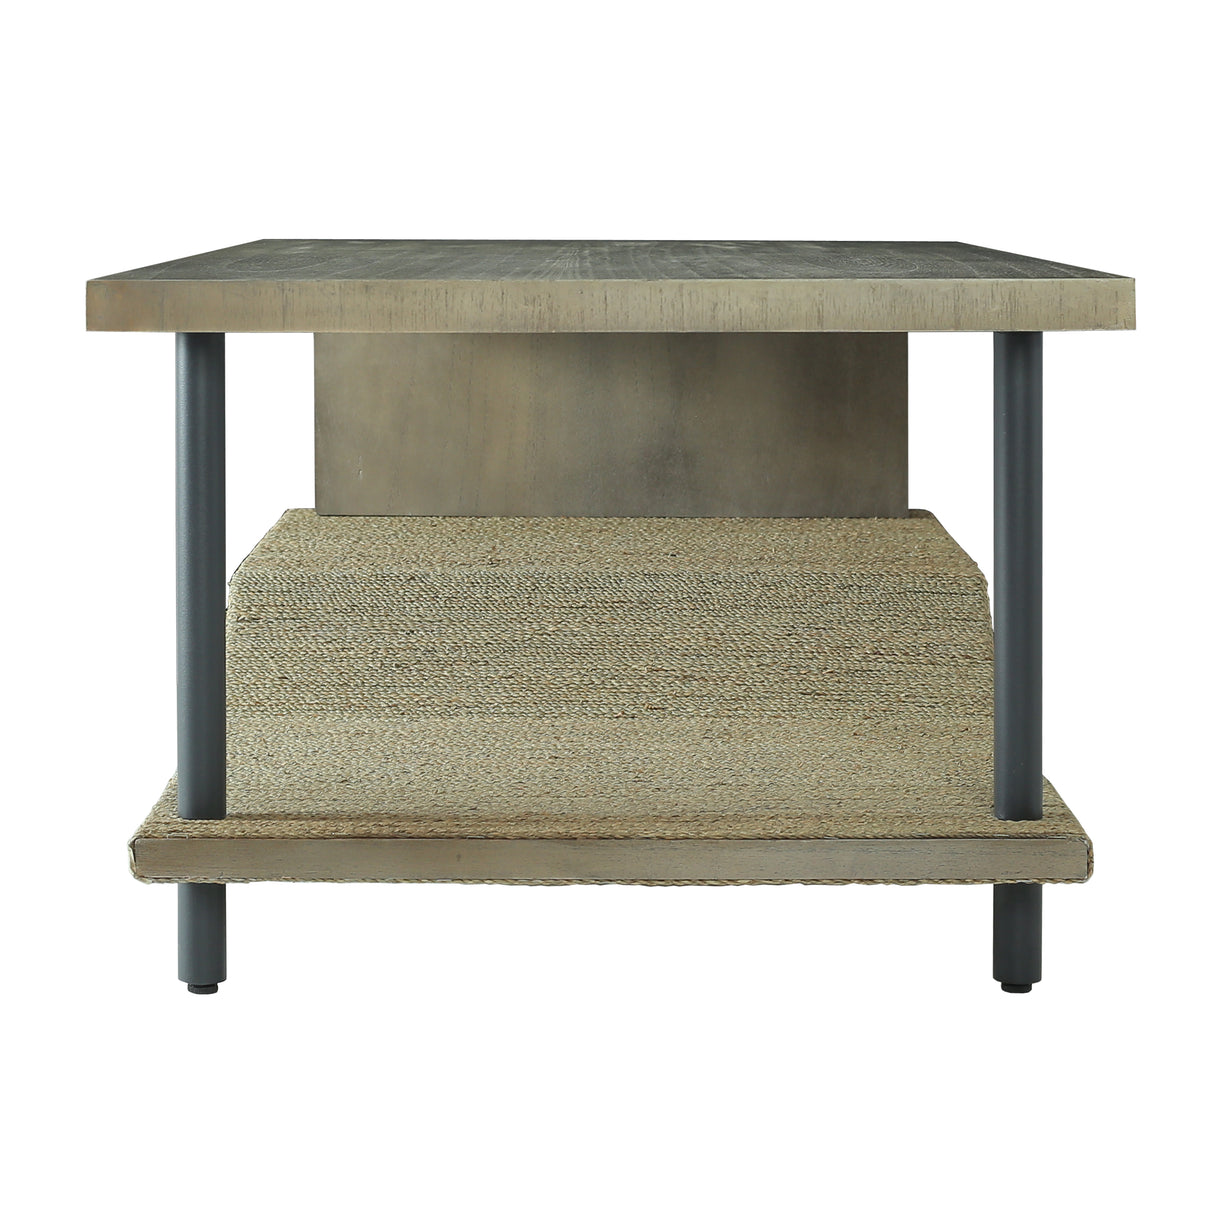 Elk S0075-9879 Riverview Coffee Table - Gray